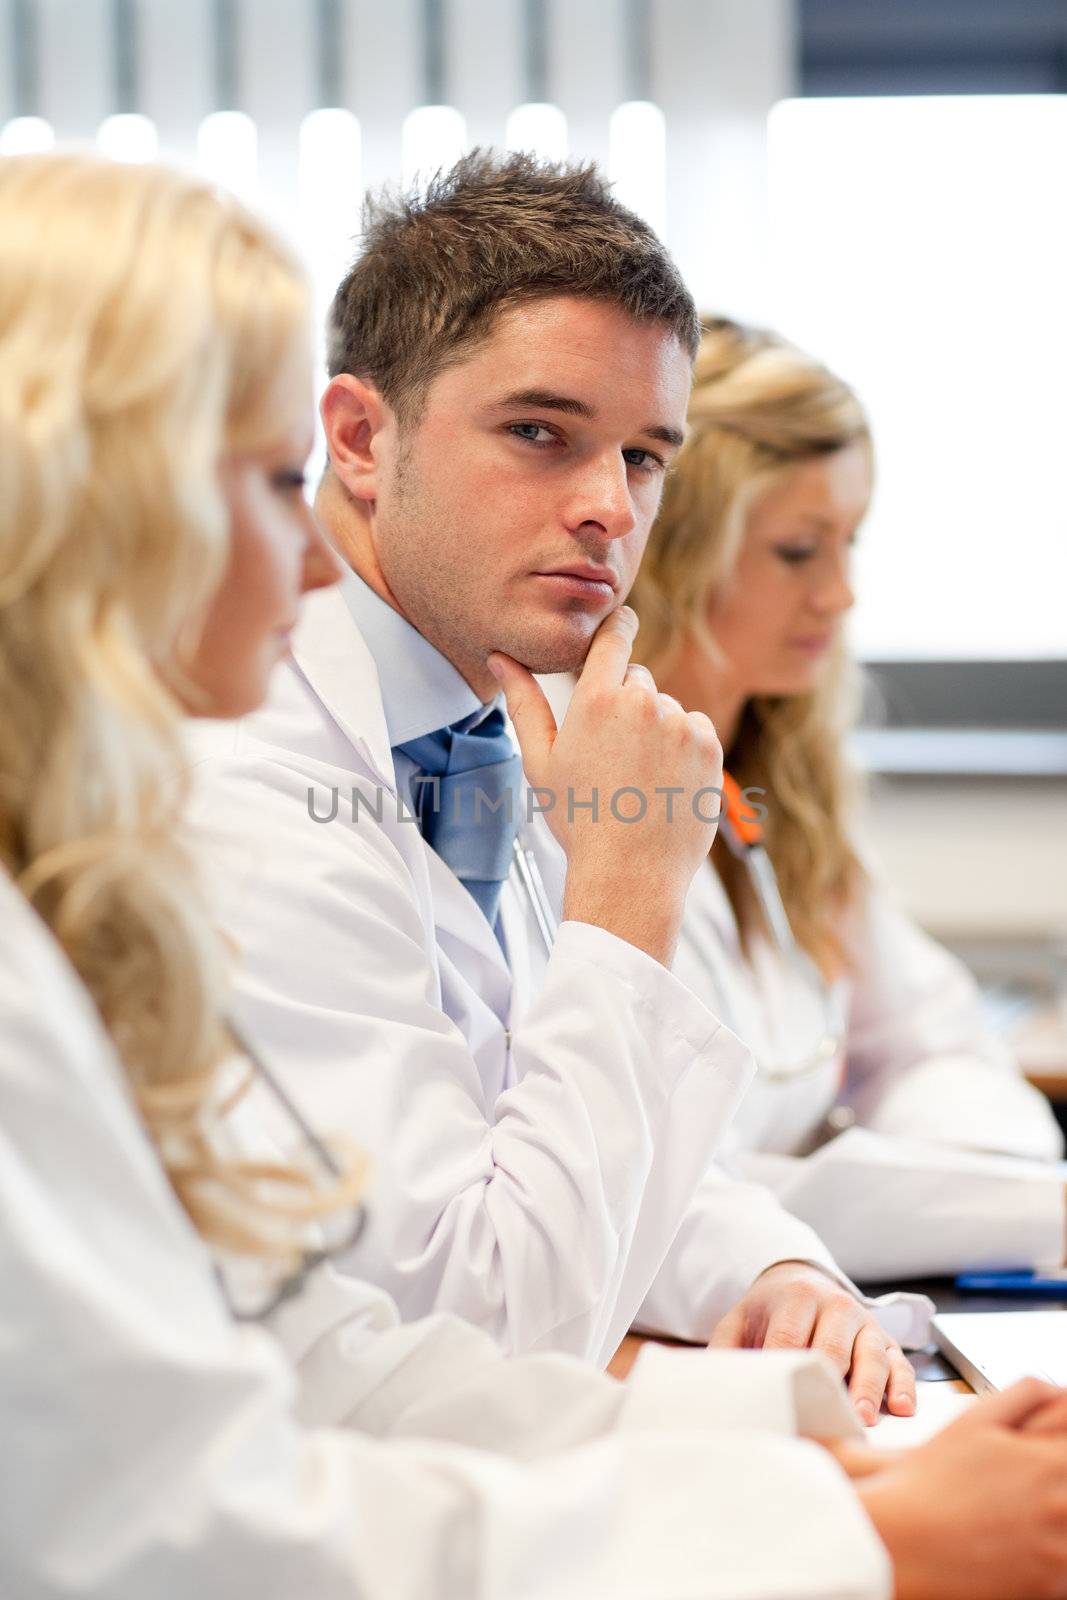 Team of doctors at a meeting